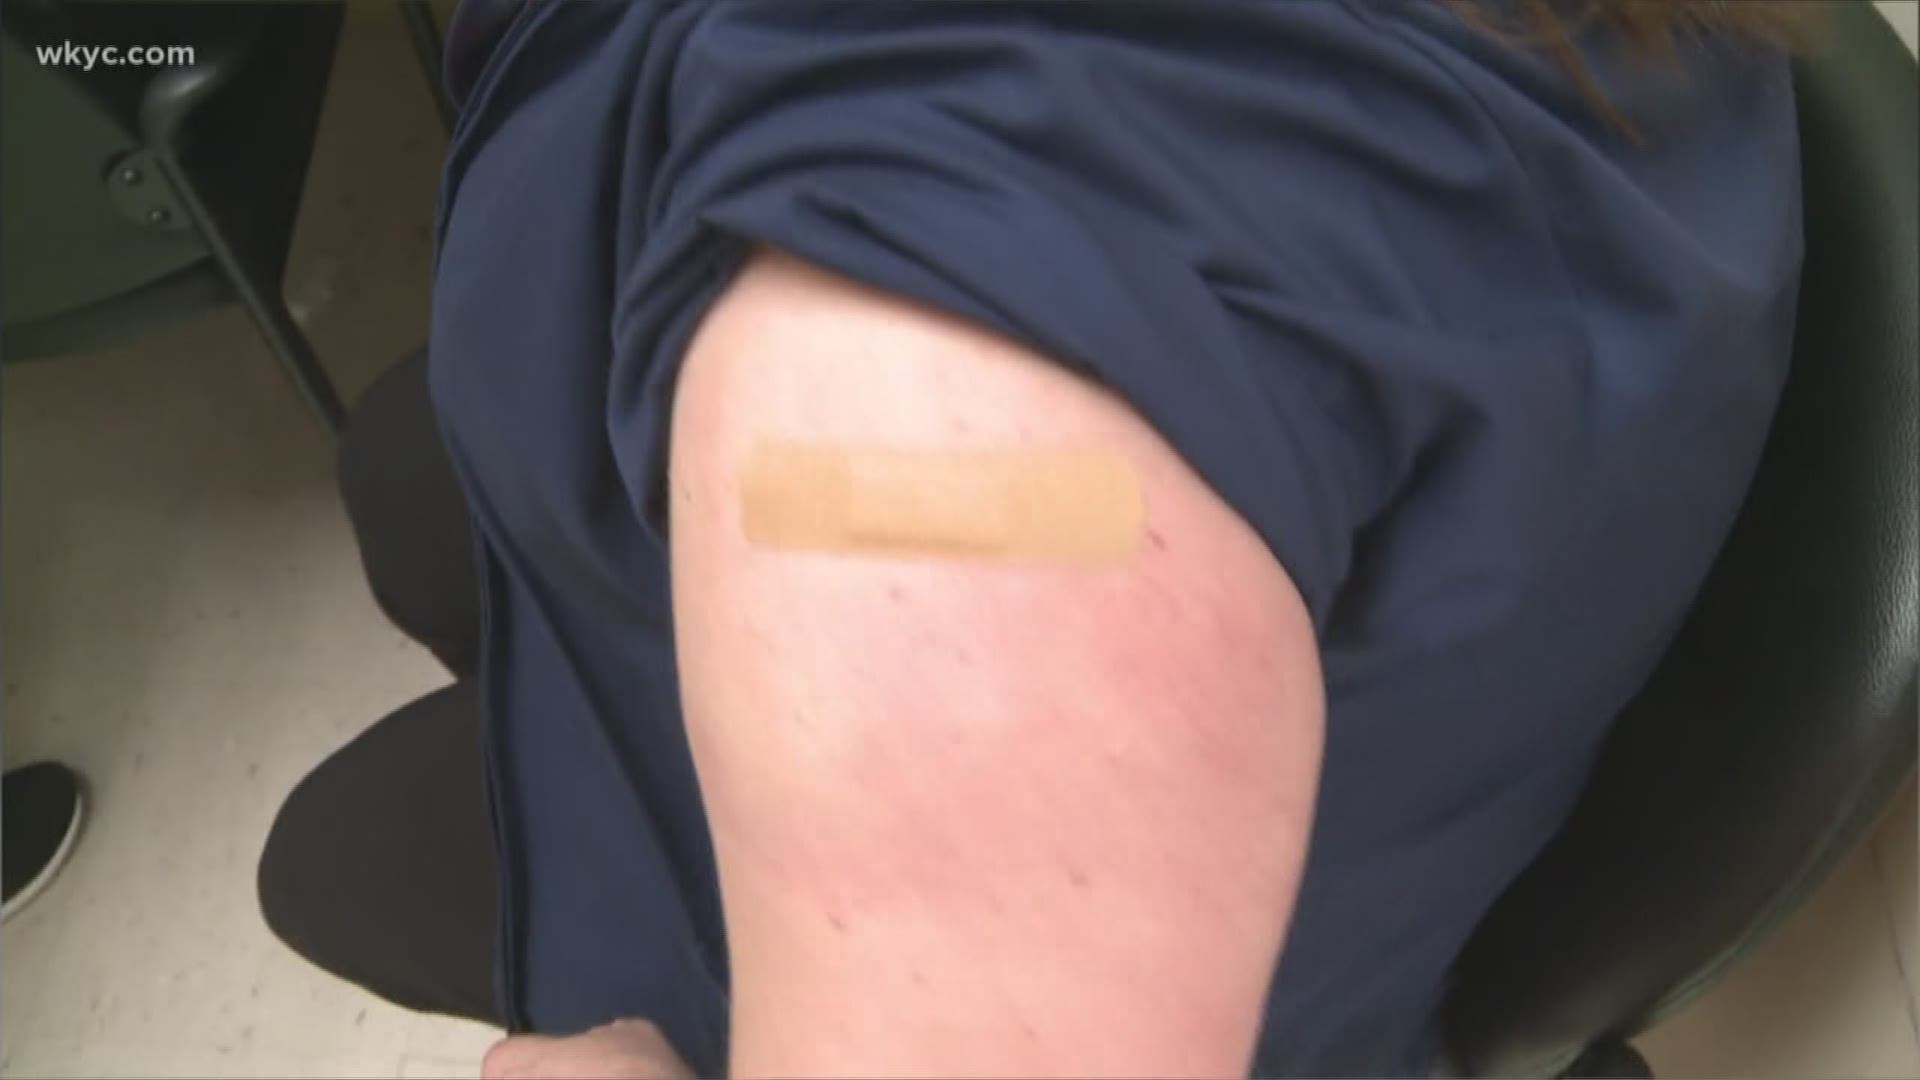 Sept. 10, 2019: Health officials say now is the time to get a flu shot. Why? Because it takes your body about two weeks to build the antibodies after getting the vaccine. WKYC's Austin Love explains.